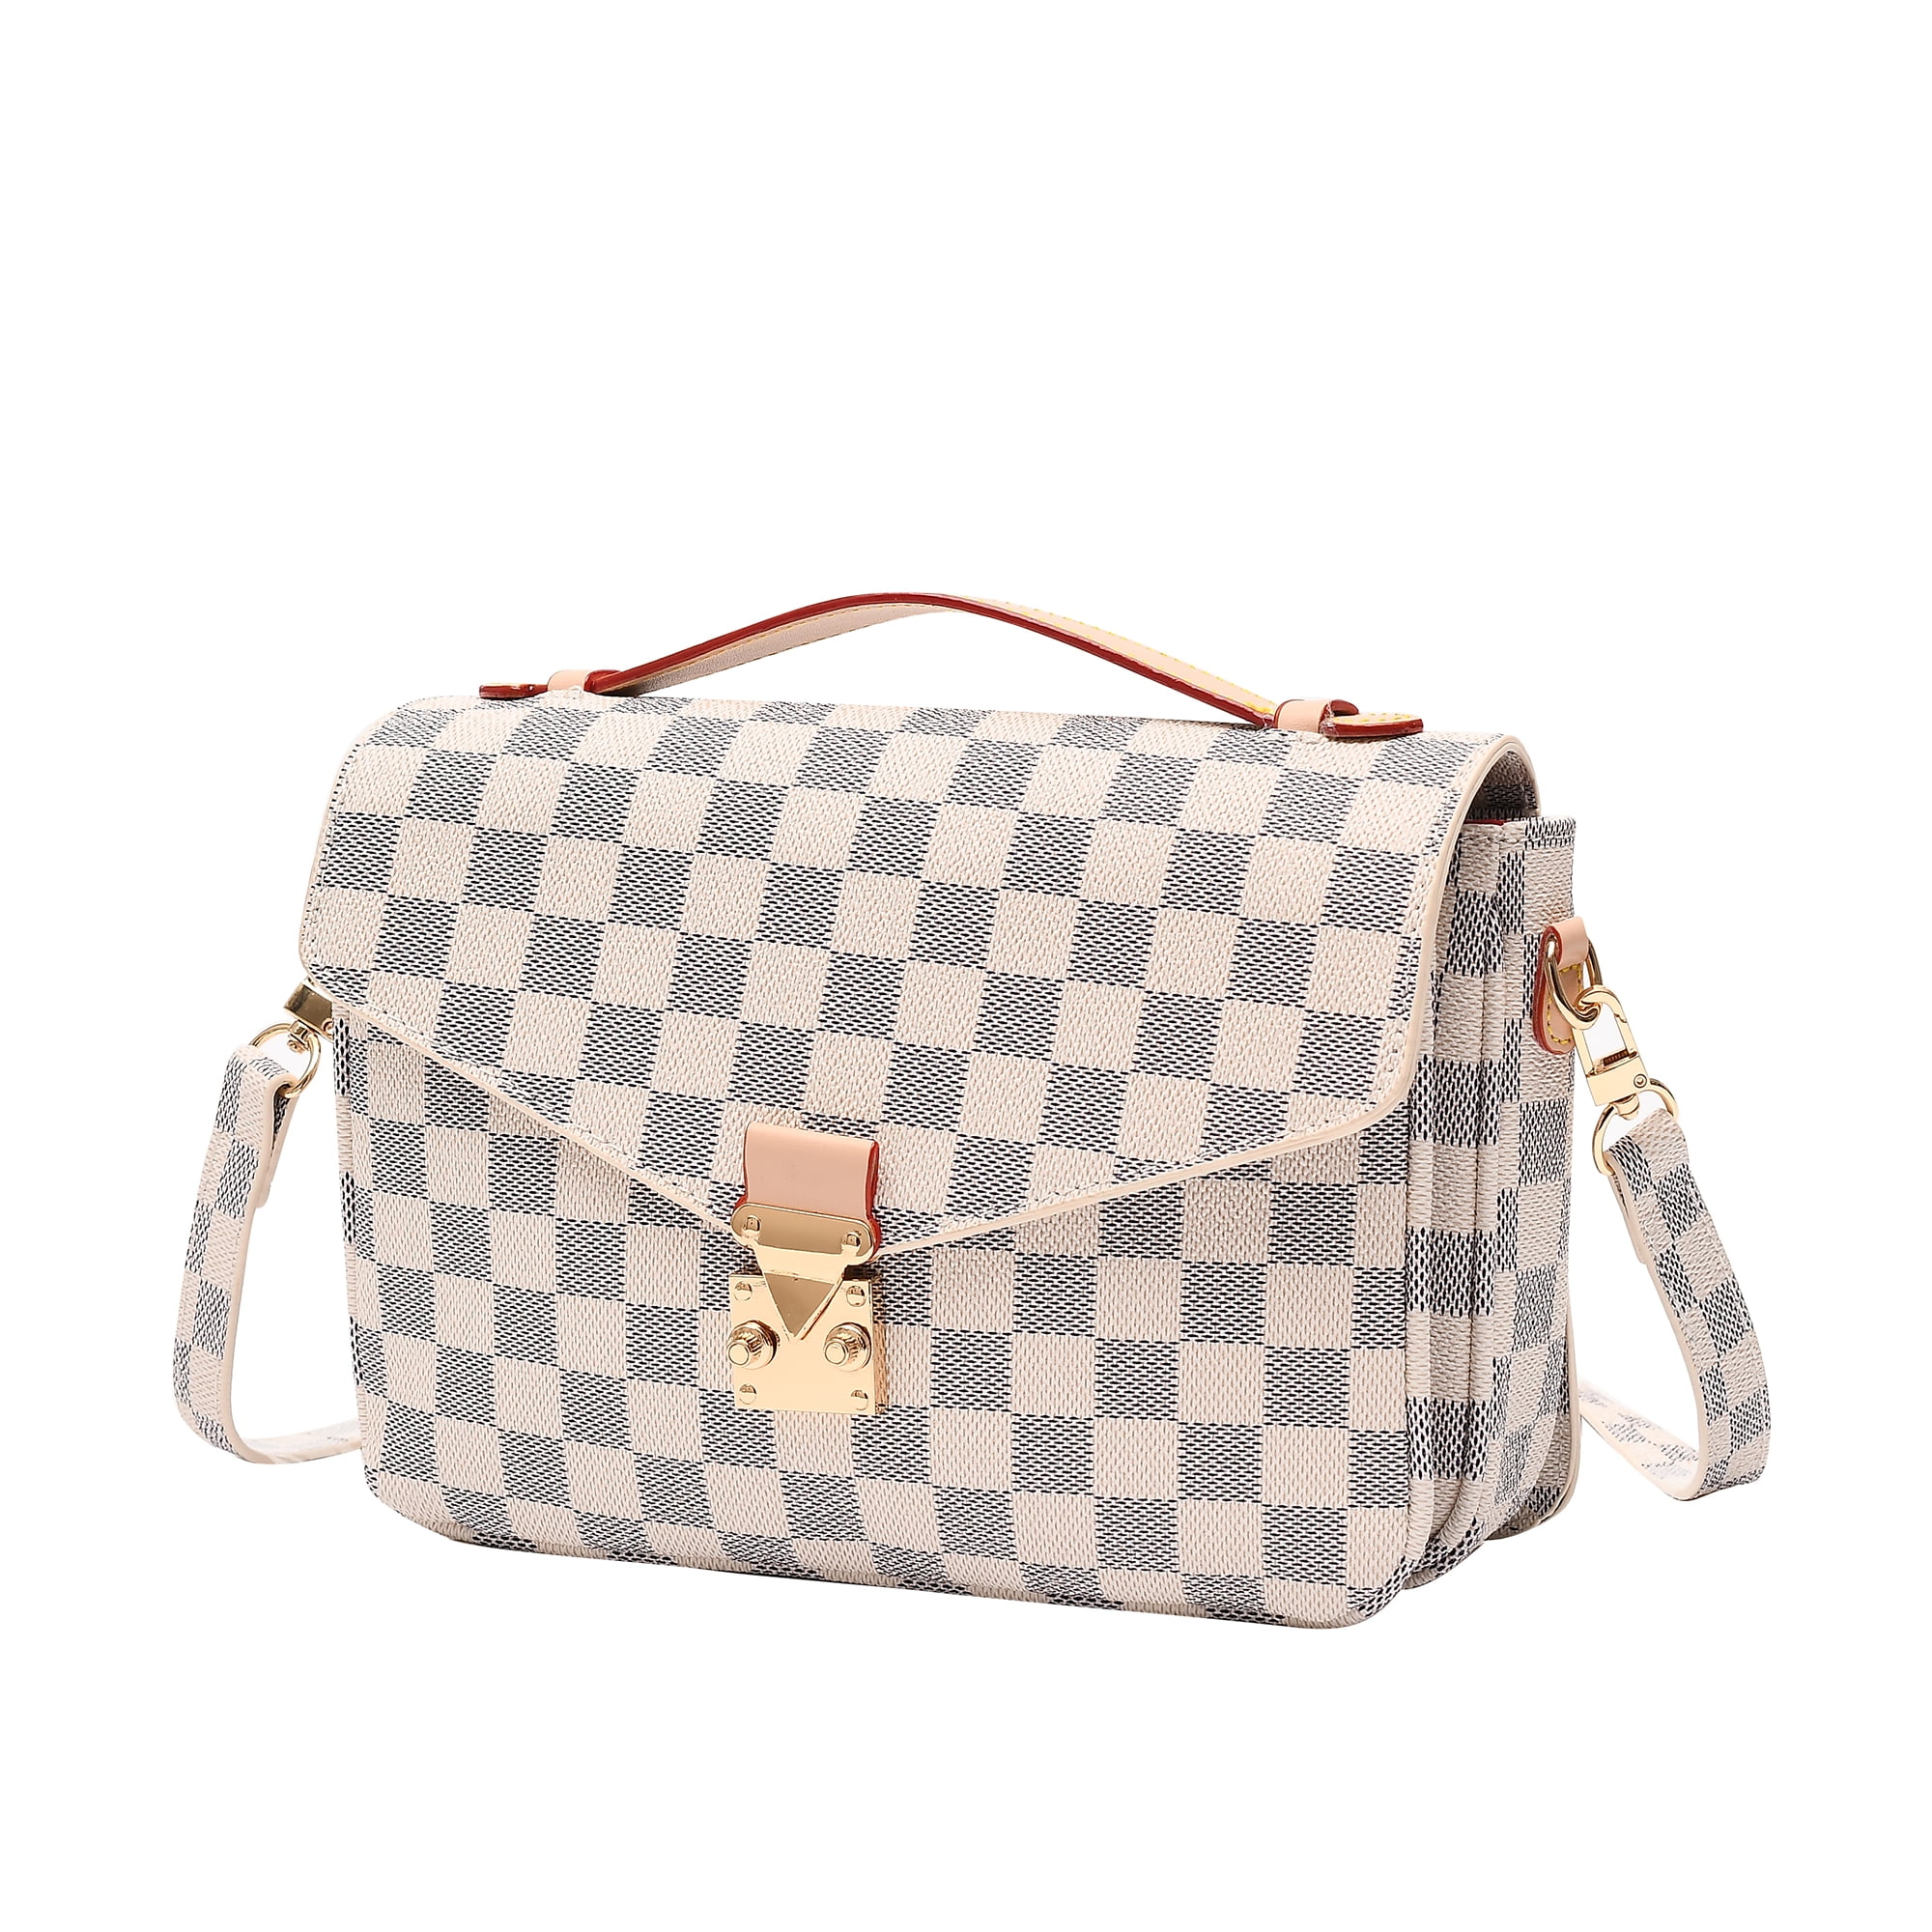 MK Gdledy Women Handbags Checkered Tote Shoulder Bag with inner